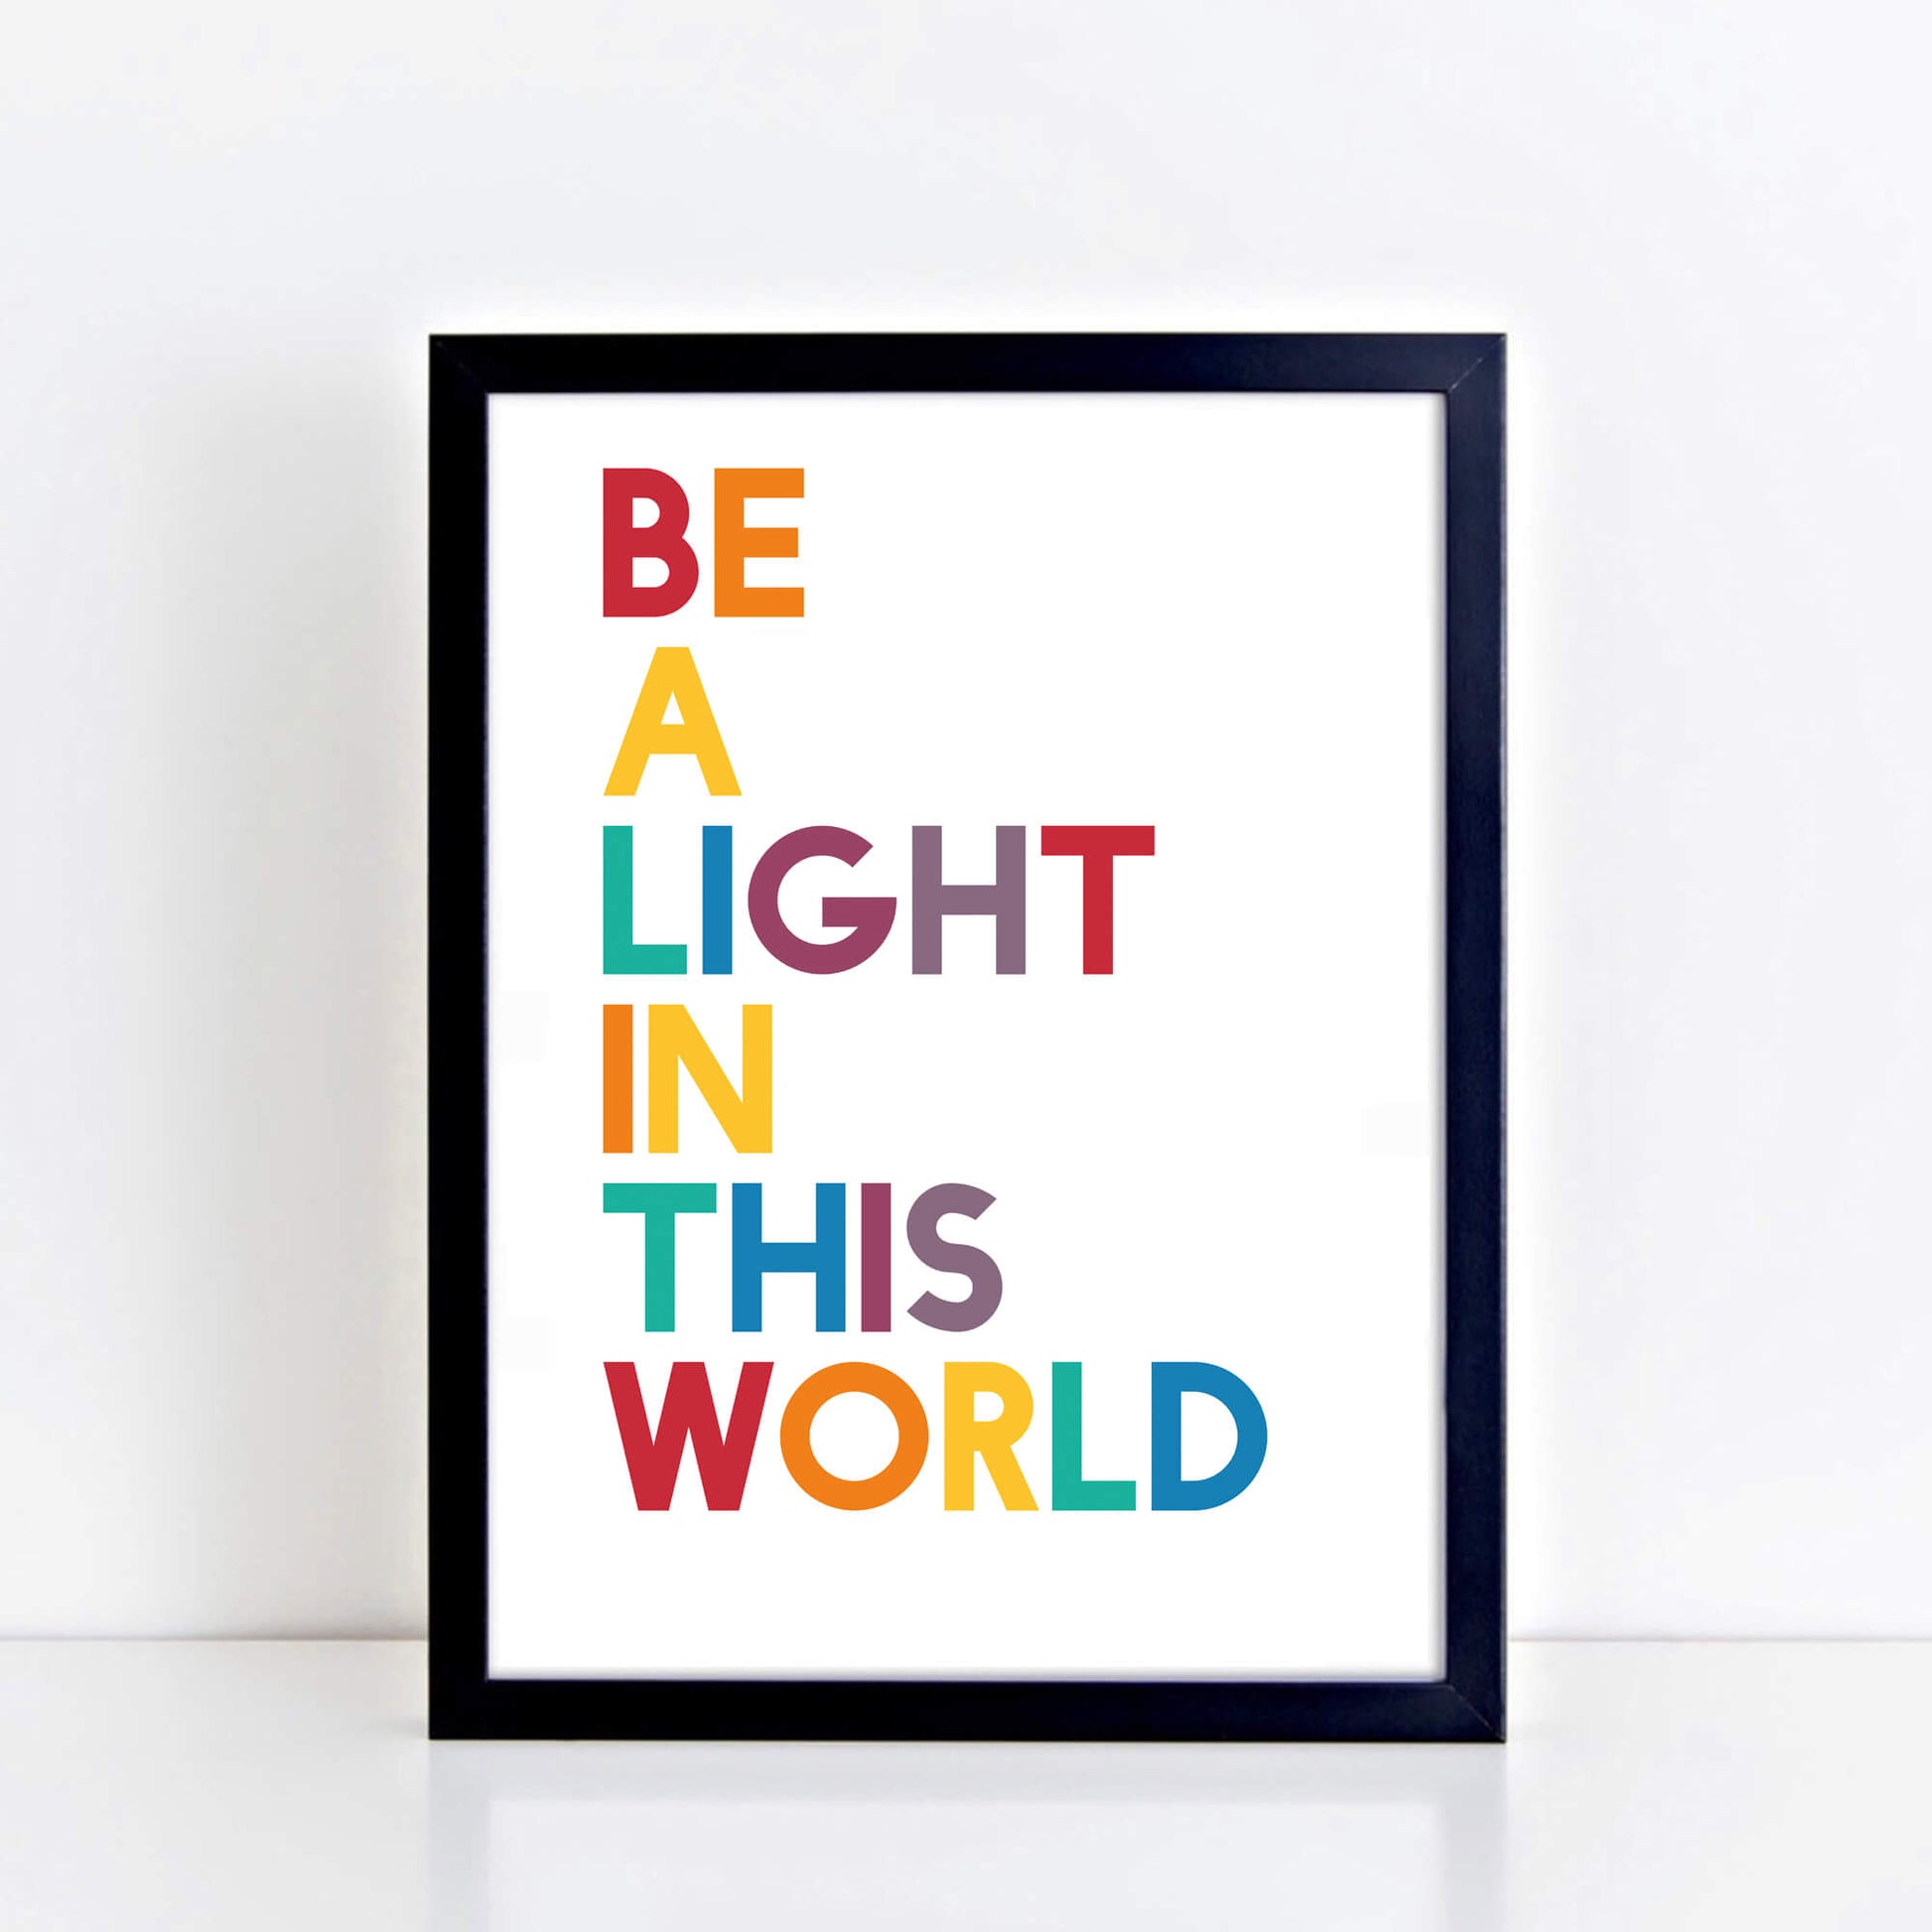 Be A Light In This World Print by SixElevenCreations. Product Code SEP0208